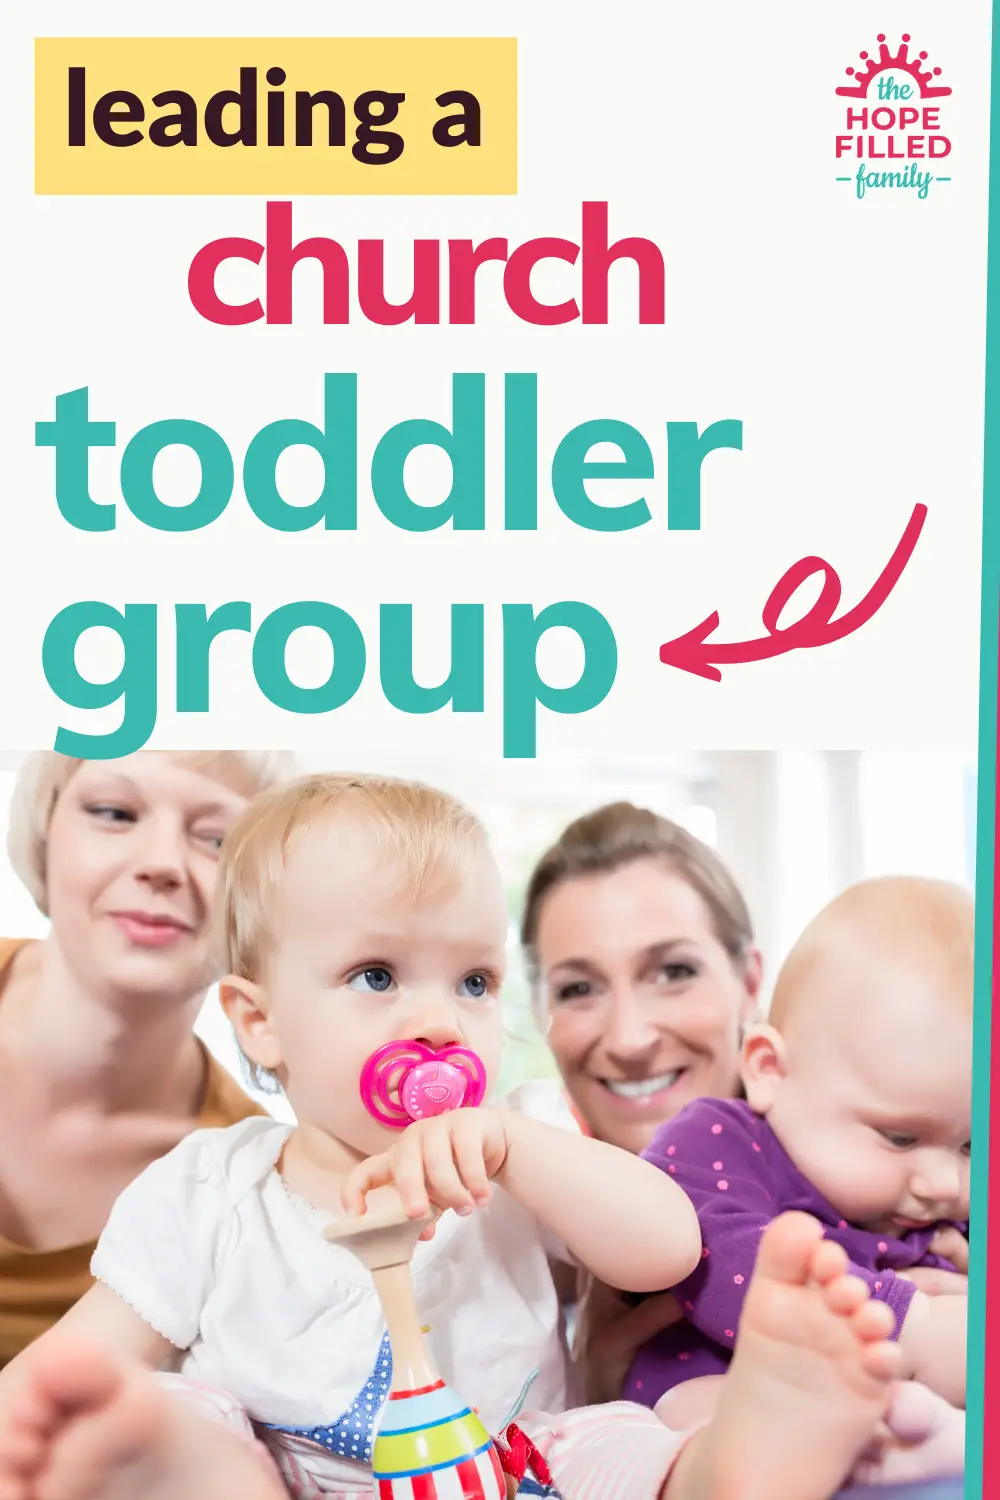 How do I set up and lead a church toddler group? What should I consider?